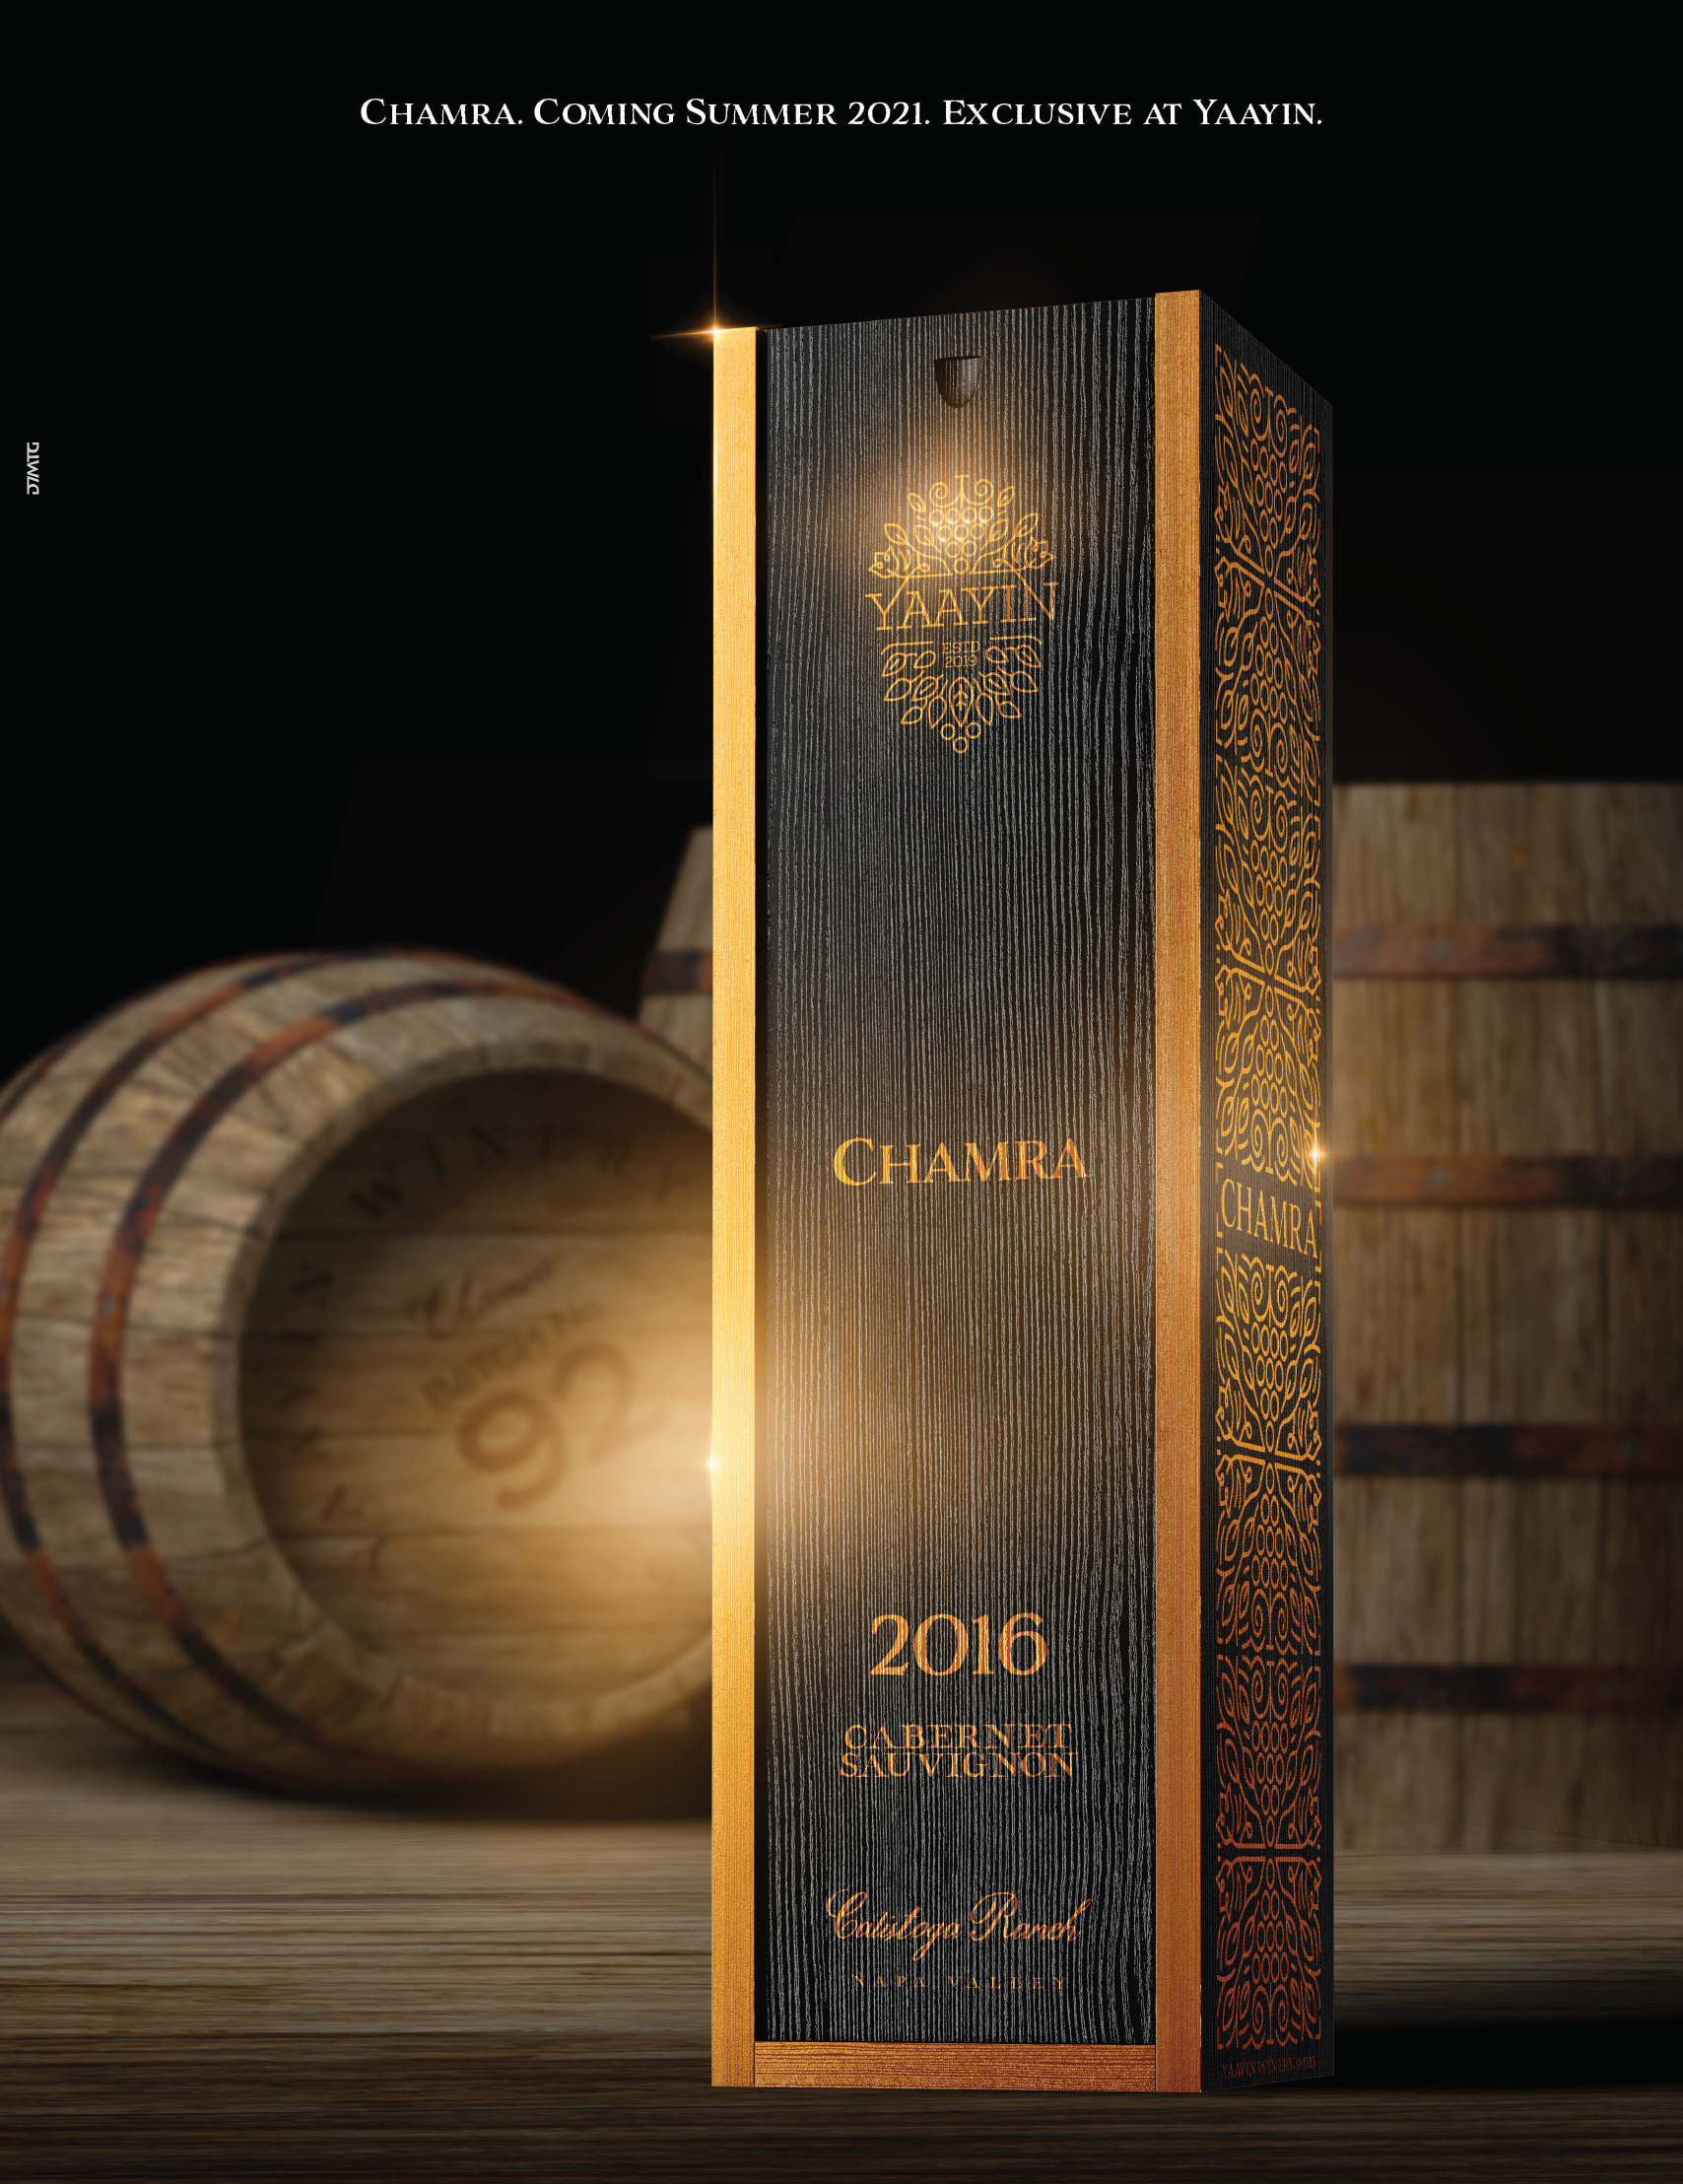 Advertisement for Chamra, a type of wine, all words are in gold. Label that says: Chamra: Coming September 2021.